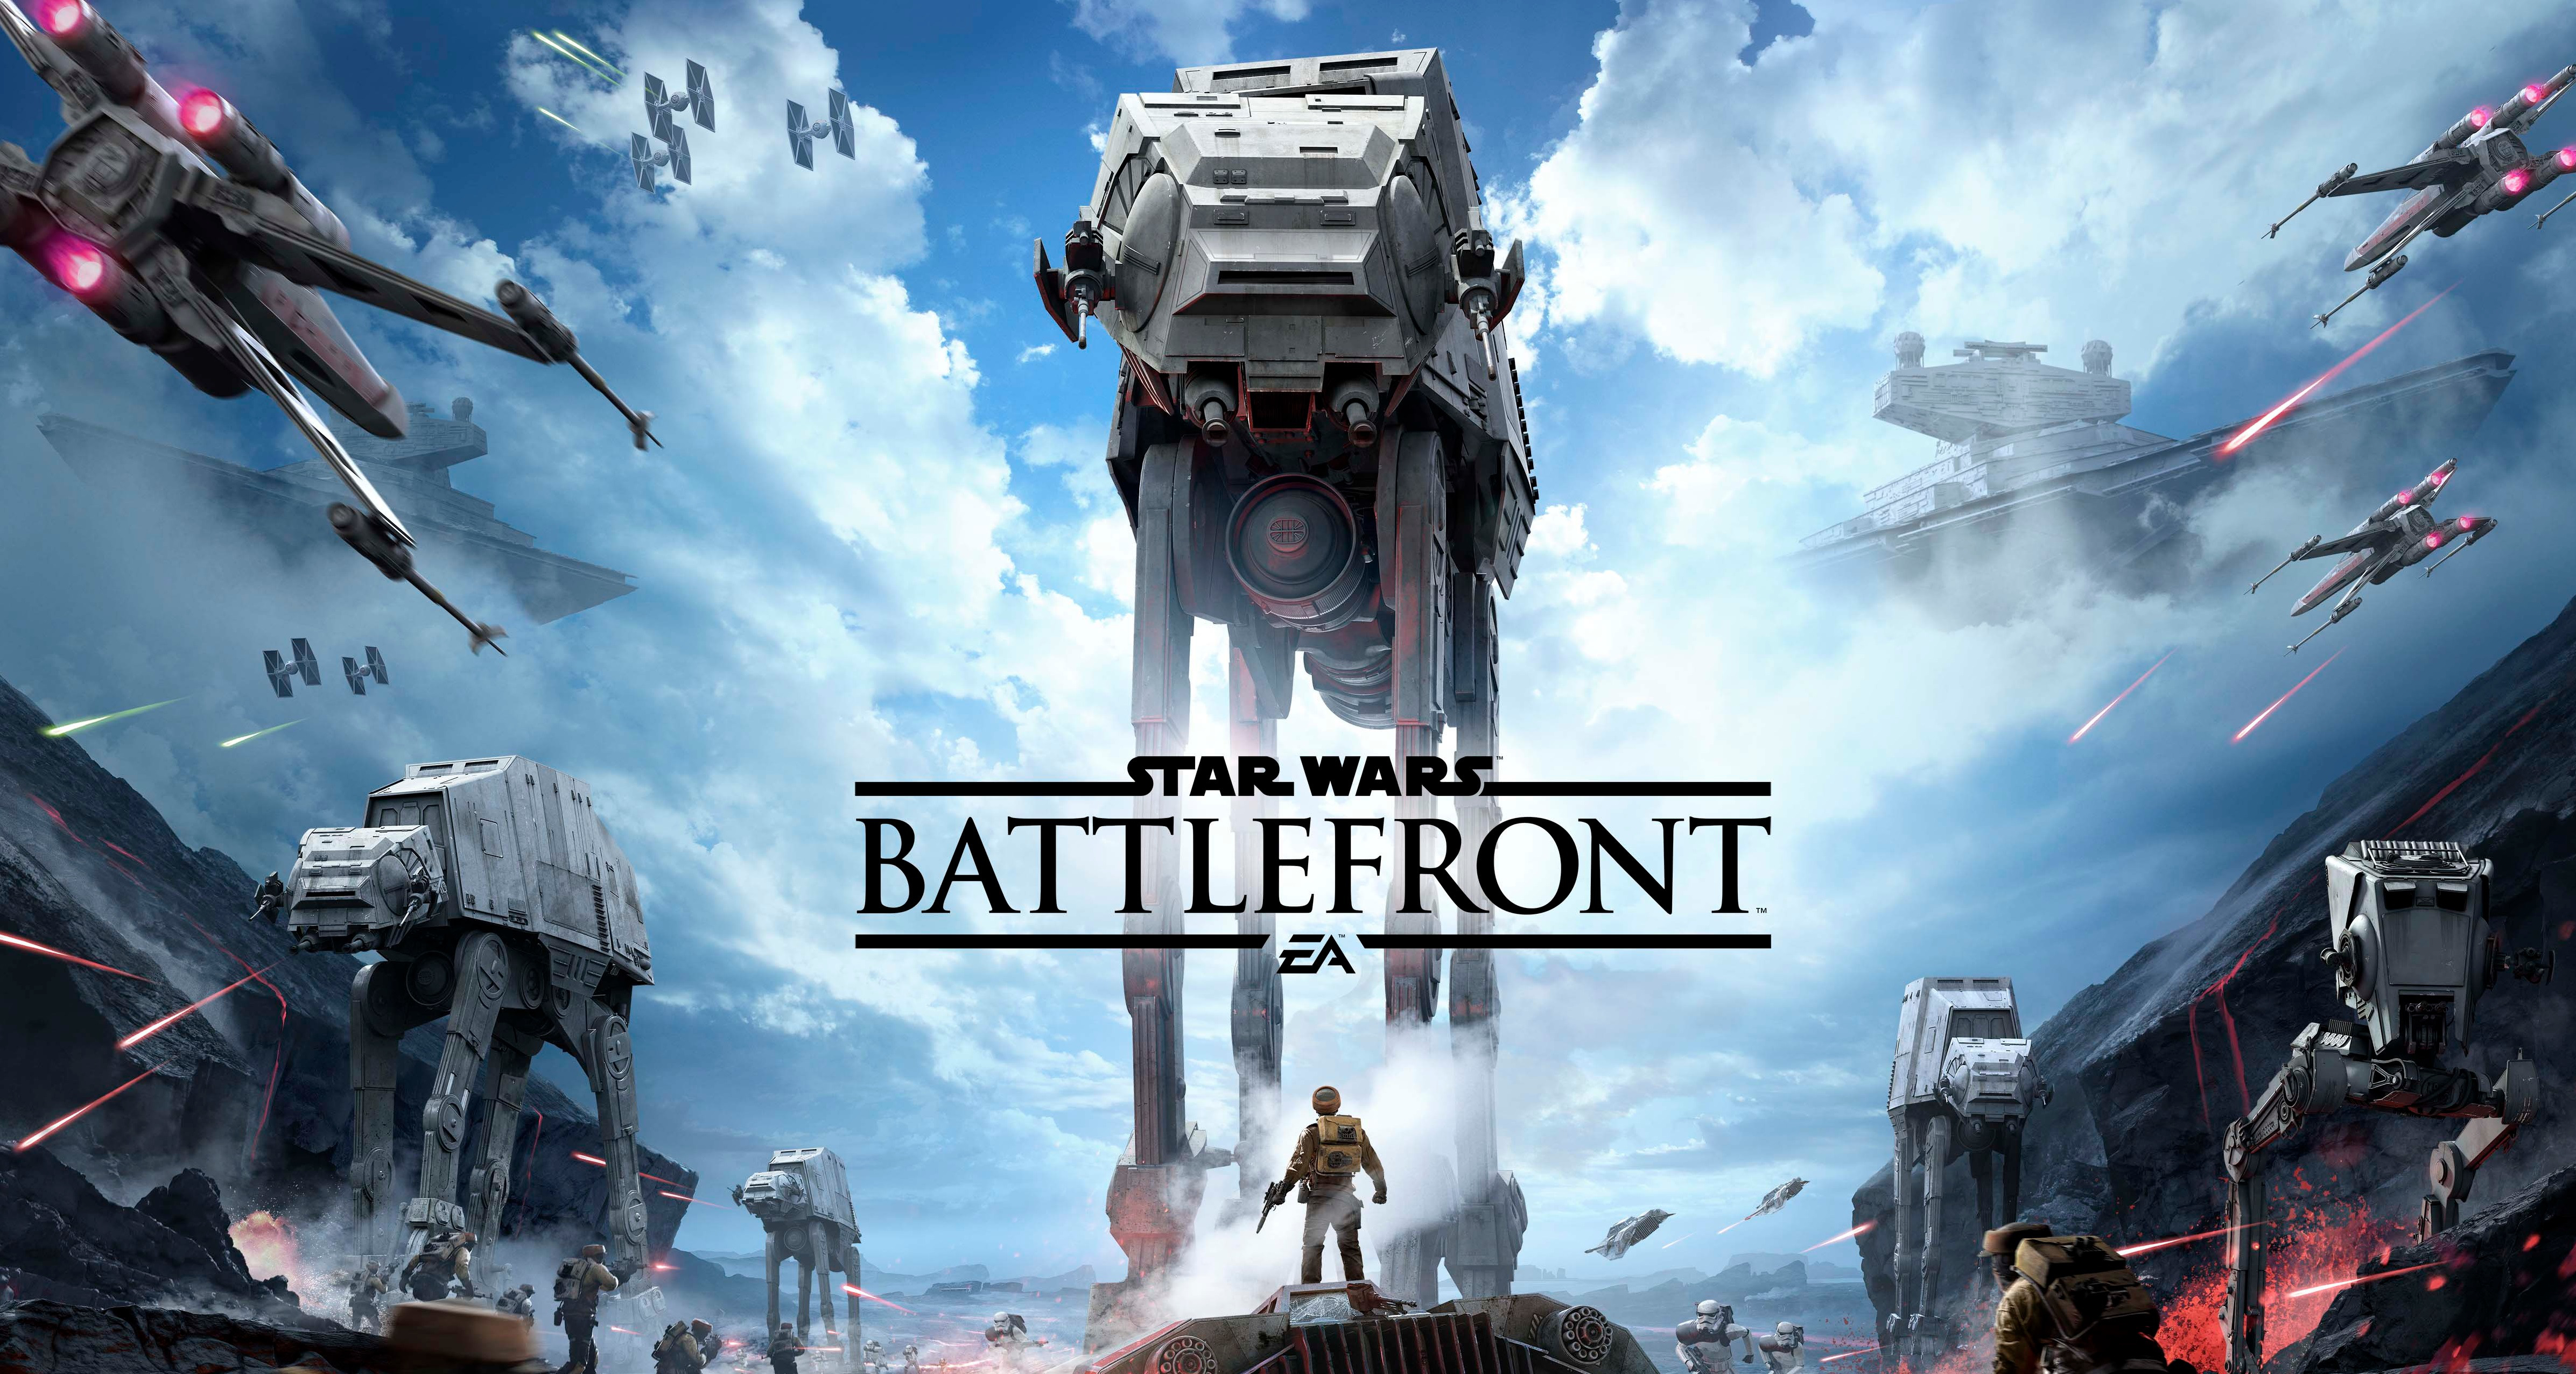 Star Wars Battlefront: Yay or Nay?